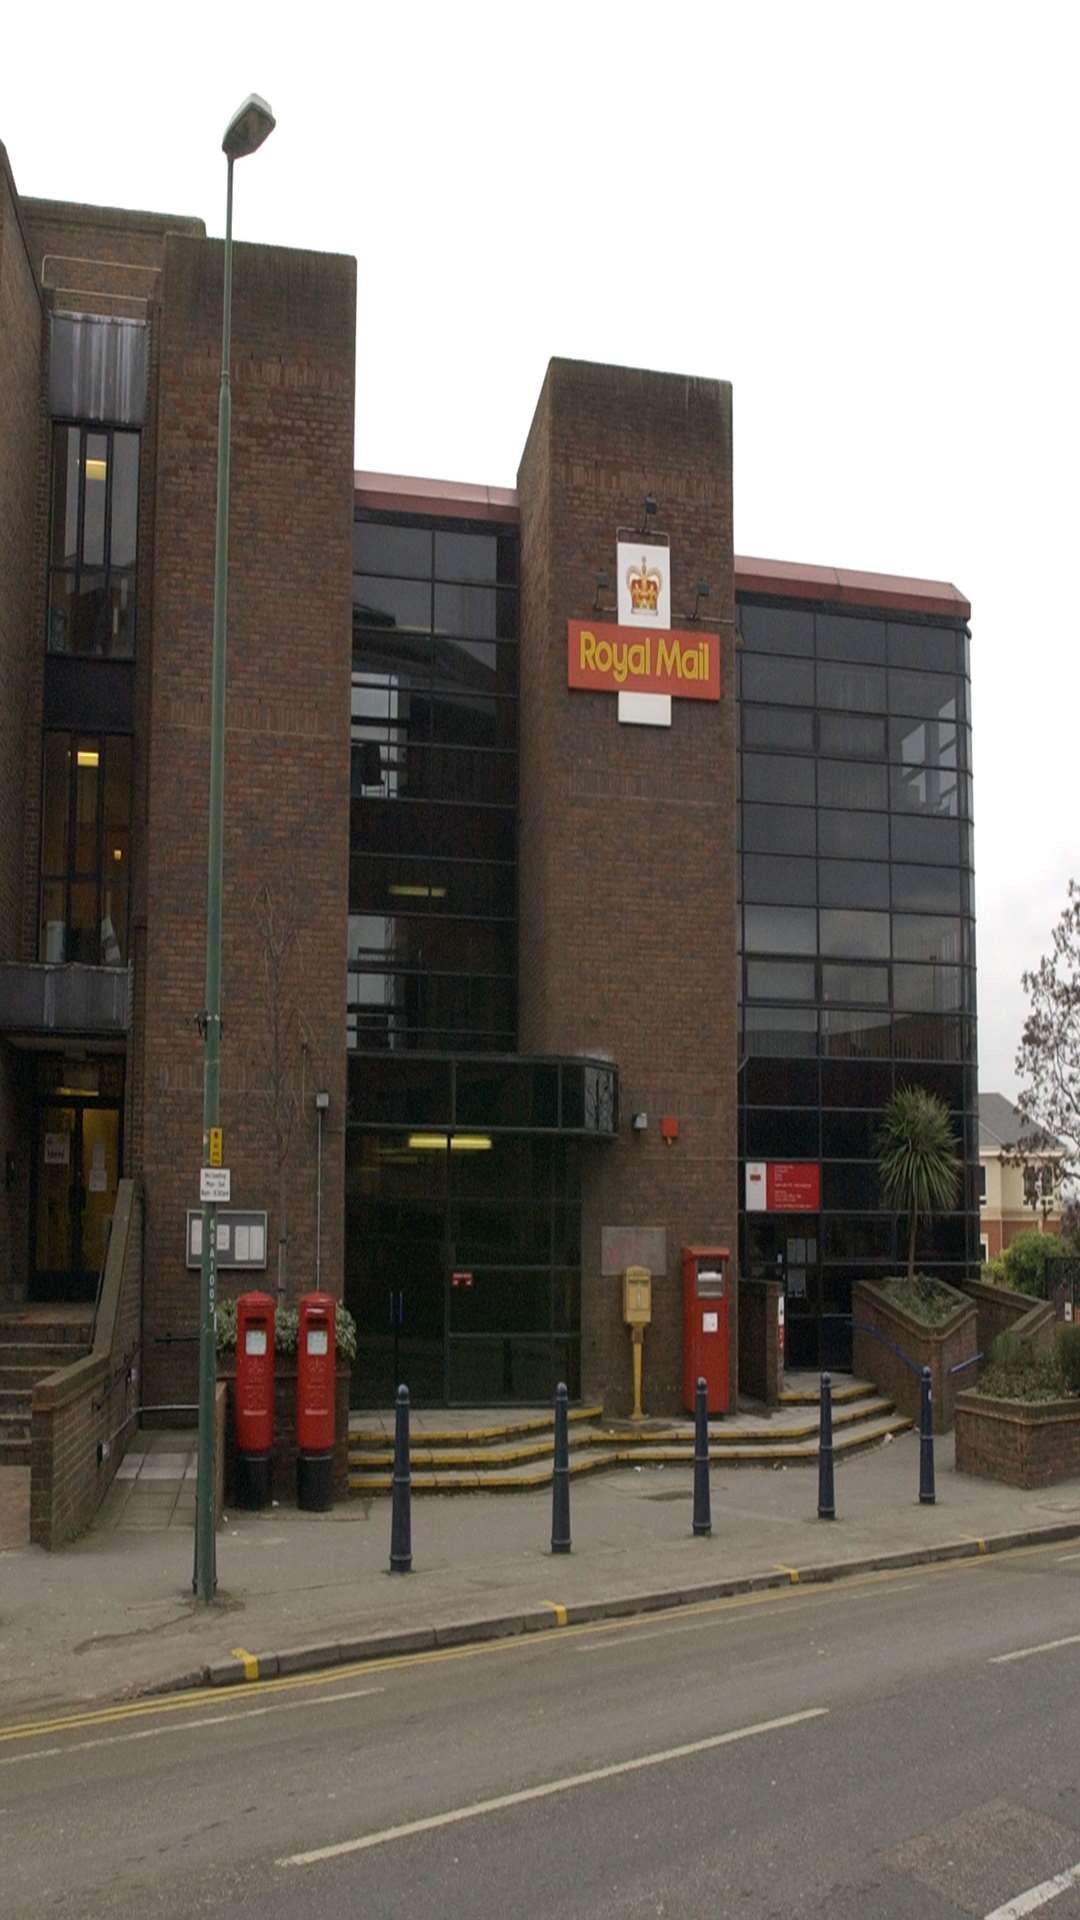 The former Royal Mail sorting office by Maidstone East railway station